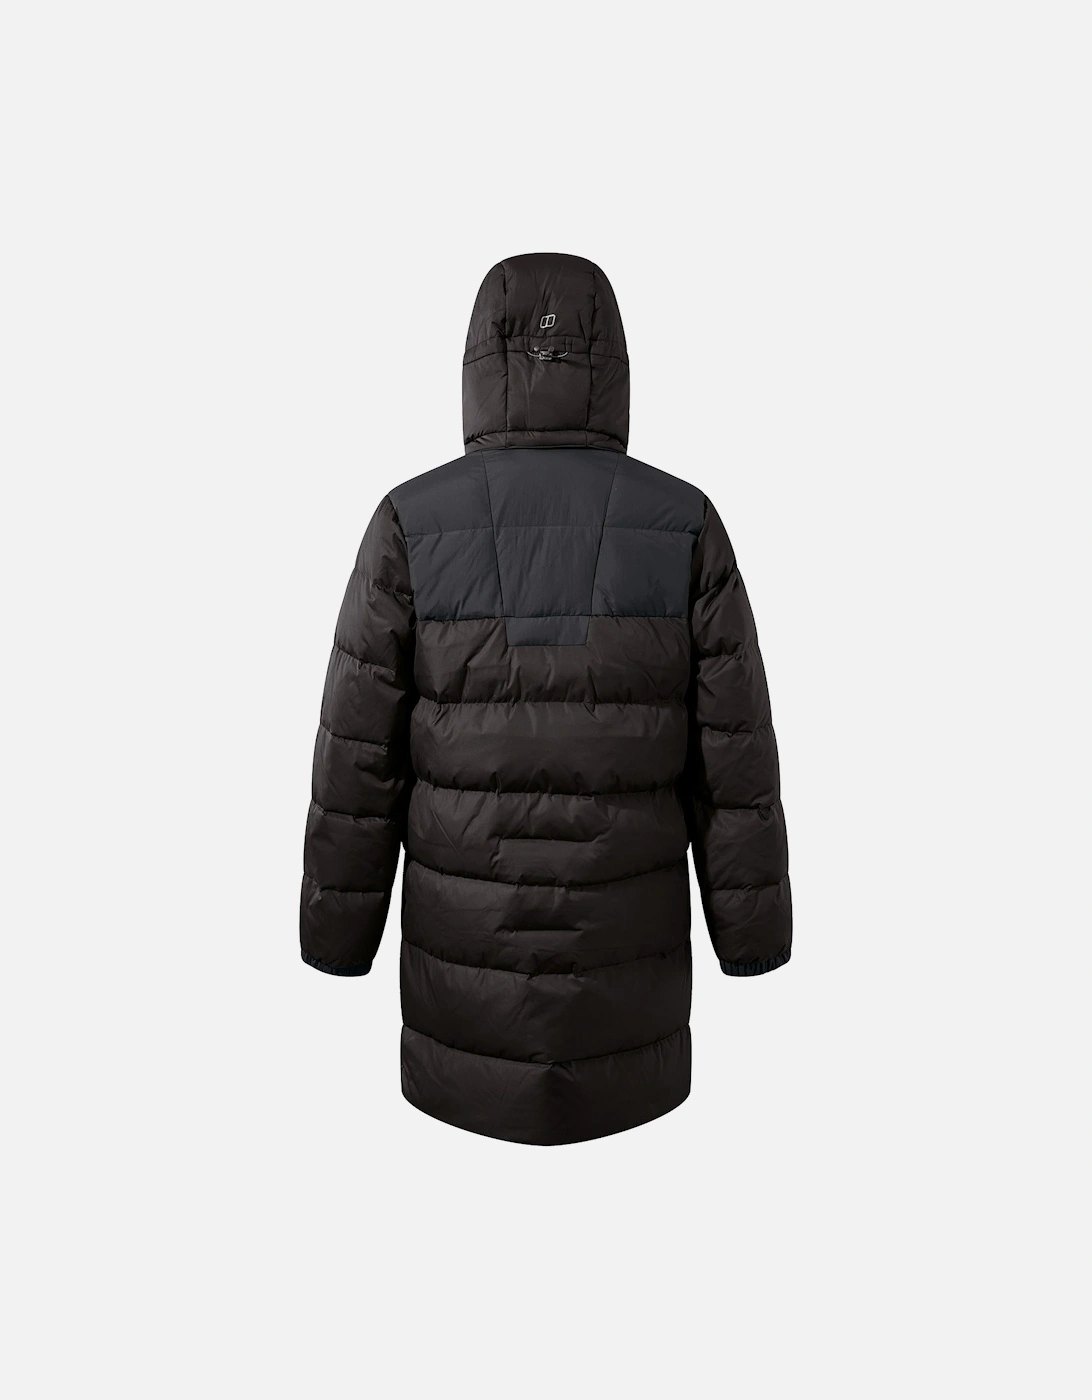 Mens Down Insulated Long Jacket (Black)